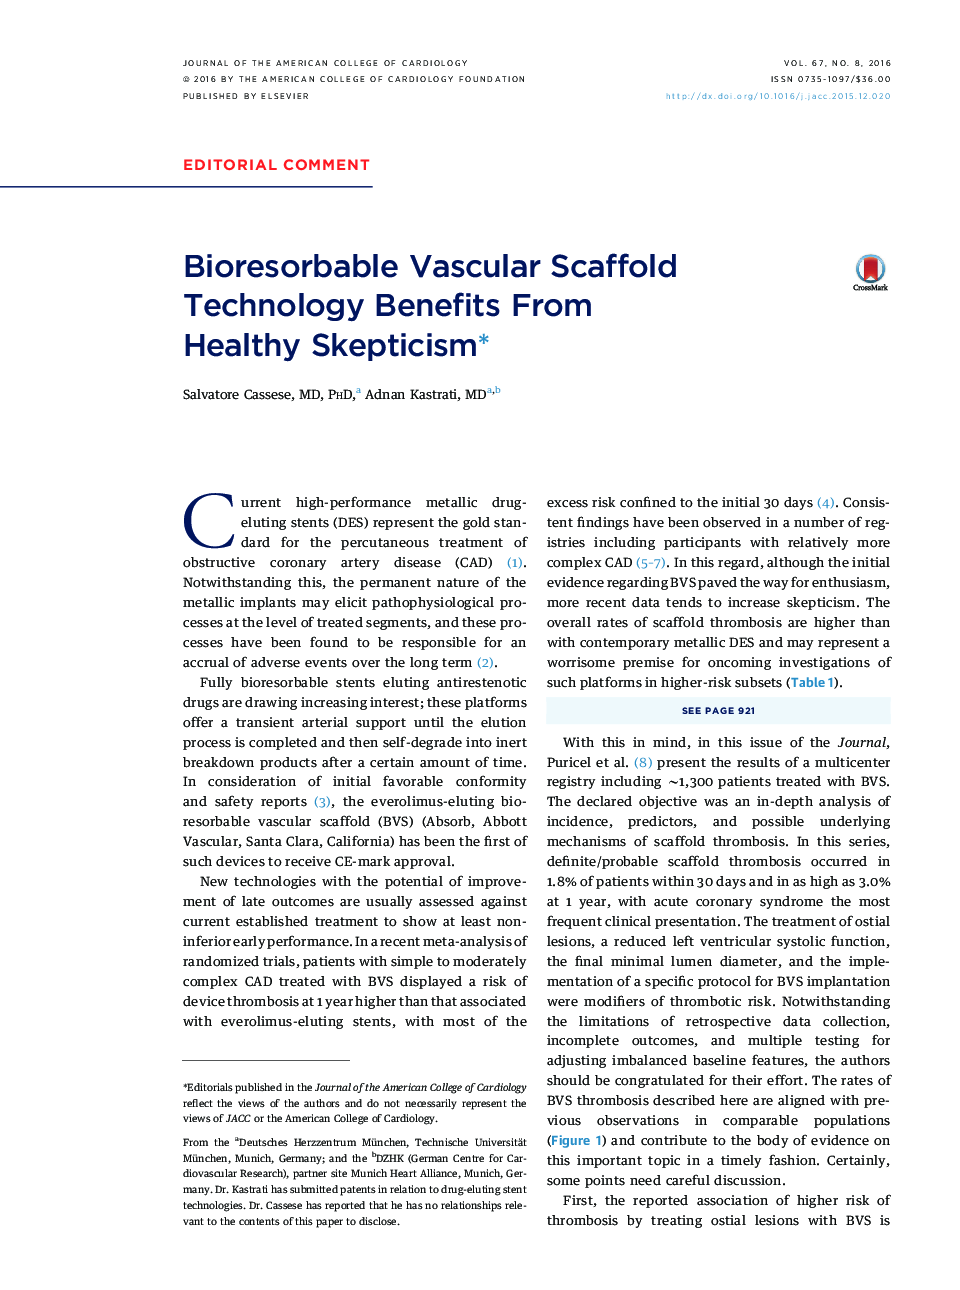 Bioresorbable Vascular Scaffold Technology Benefits From Healthy Skepticismâ